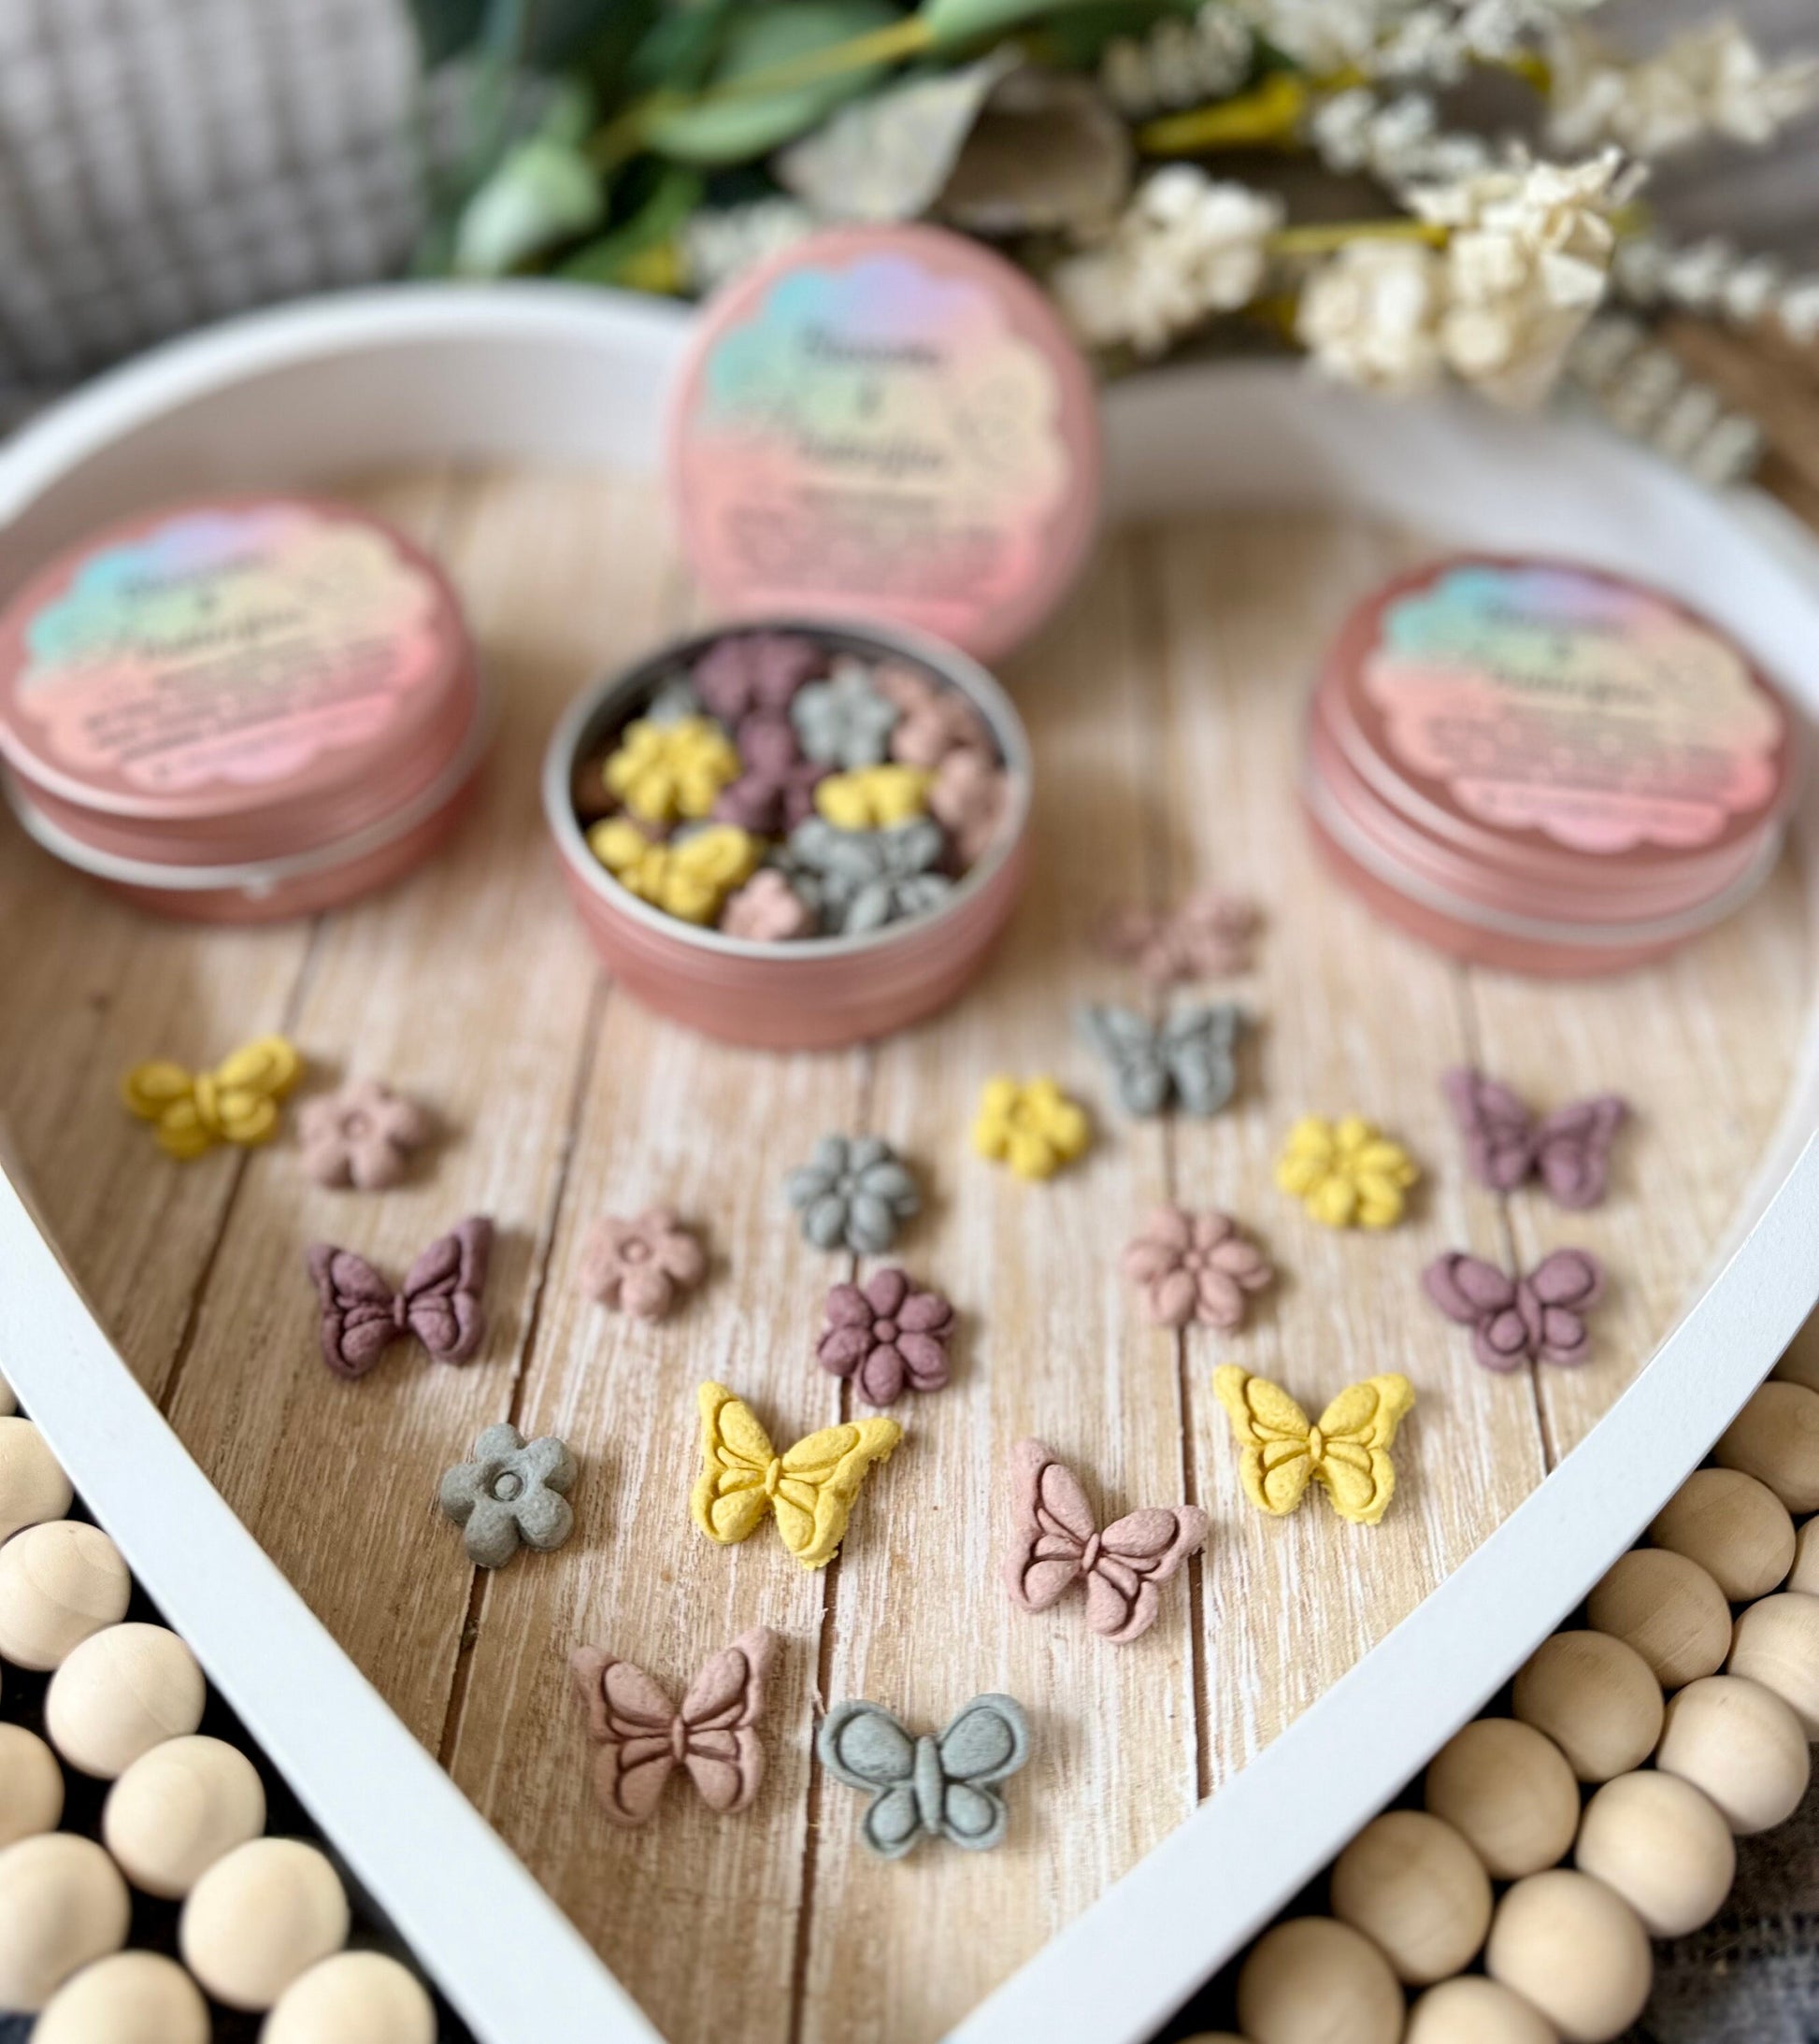 Blossoms & Butterflies~ Spring Inspired Bite Sized Treats for Rabbits, Guinea Pigs, Hamsters, Mice, and Small Pets, All Natural, Organic